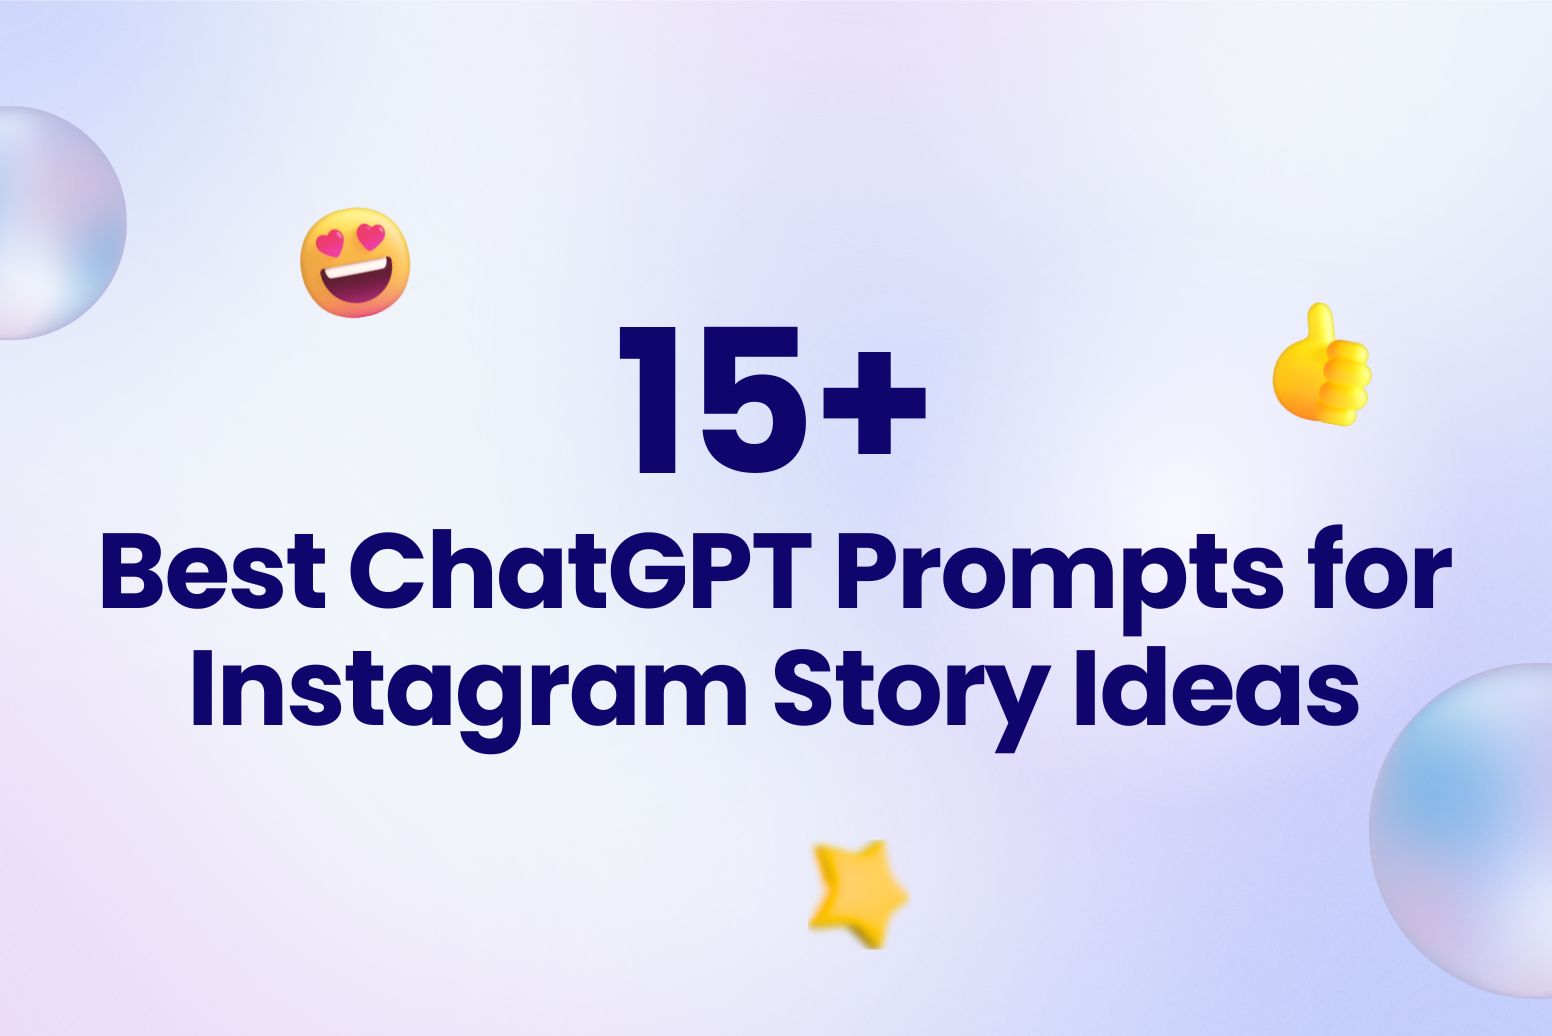 15+ Best ChatGPT Prompts for Instagram Story Ideas